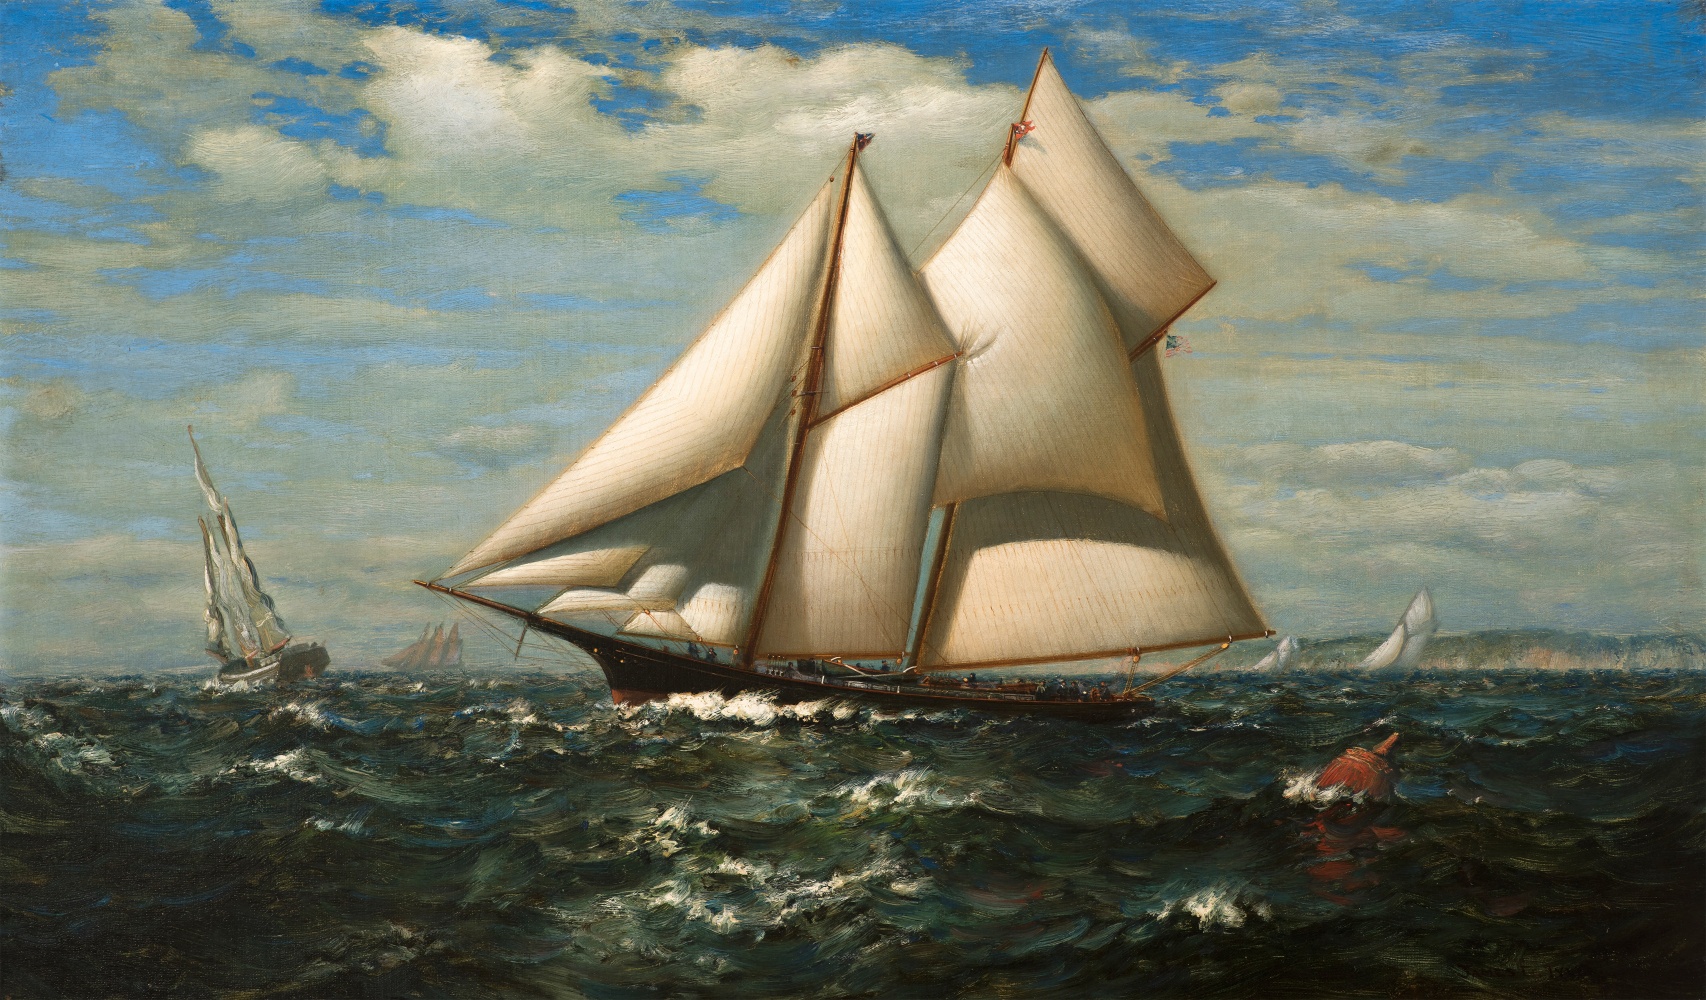 James Gale Tyler (1855–1931), The Yacht, Water Witch, oil on canvas, 18 x 30 in., signed lower right: James G. Tyler